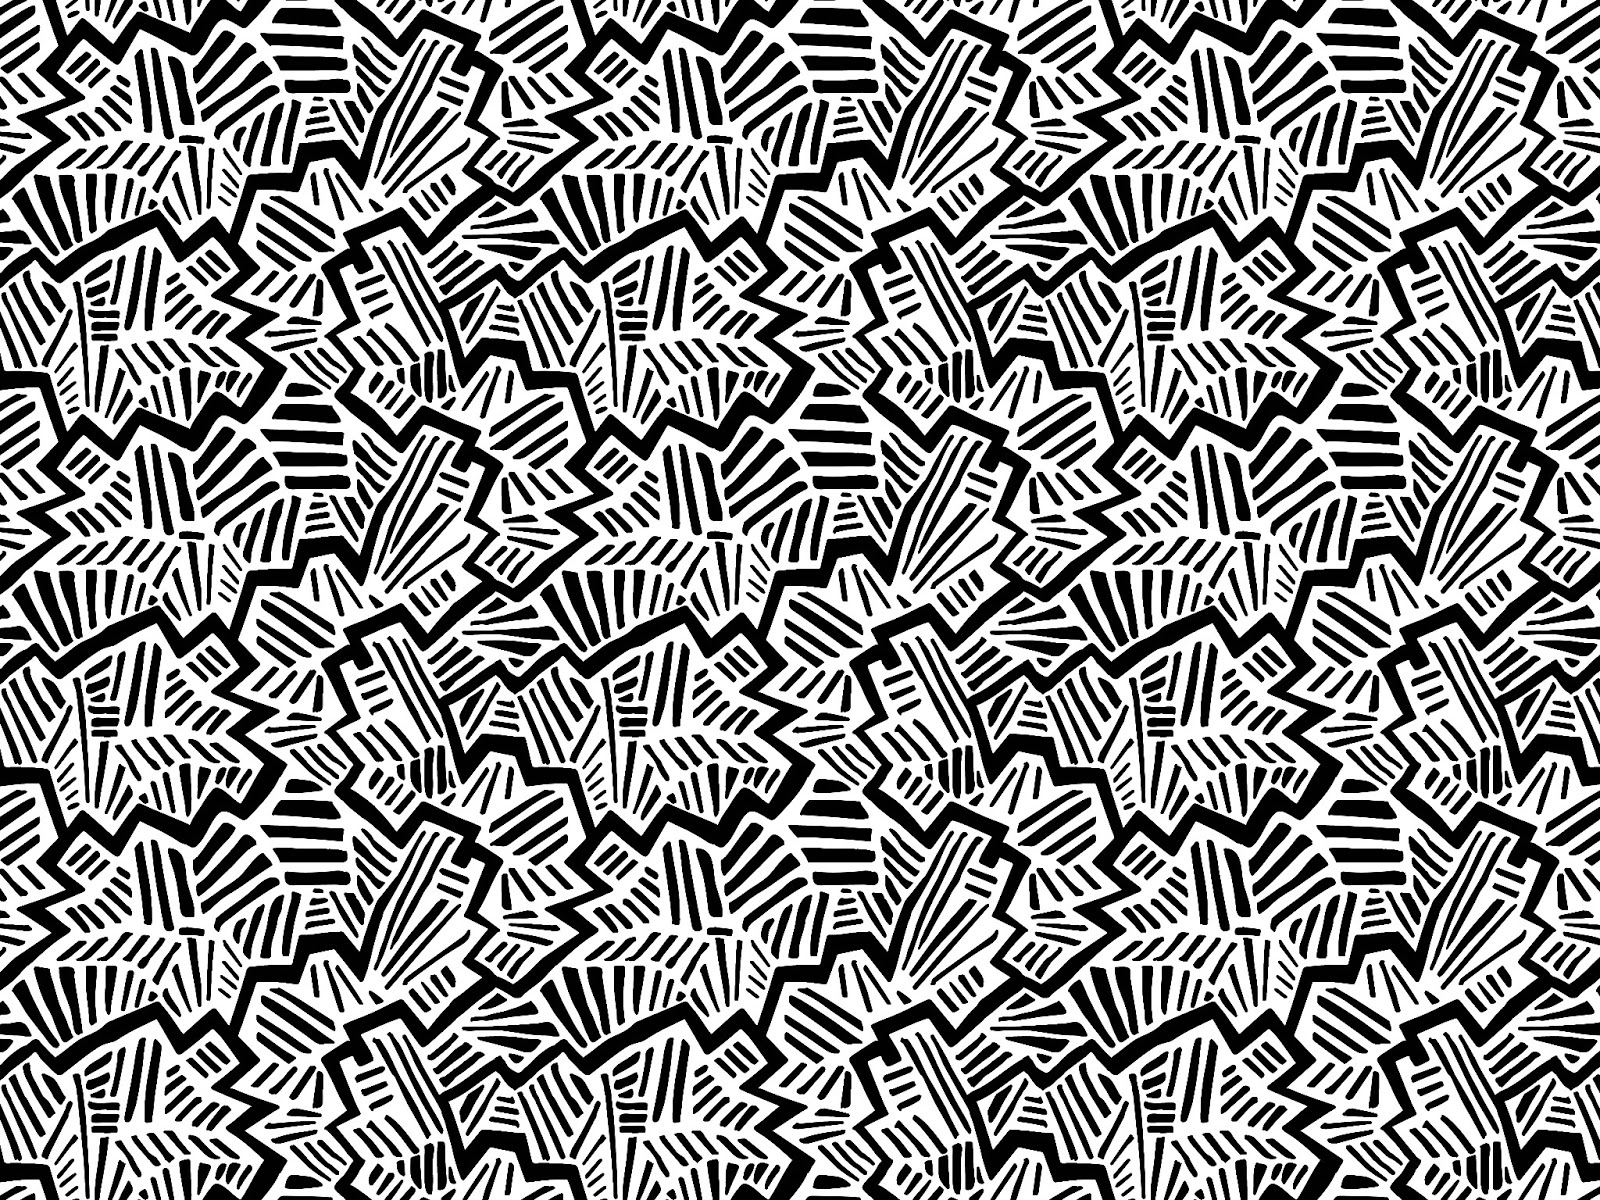 Black and White Abstract Designs Pattern